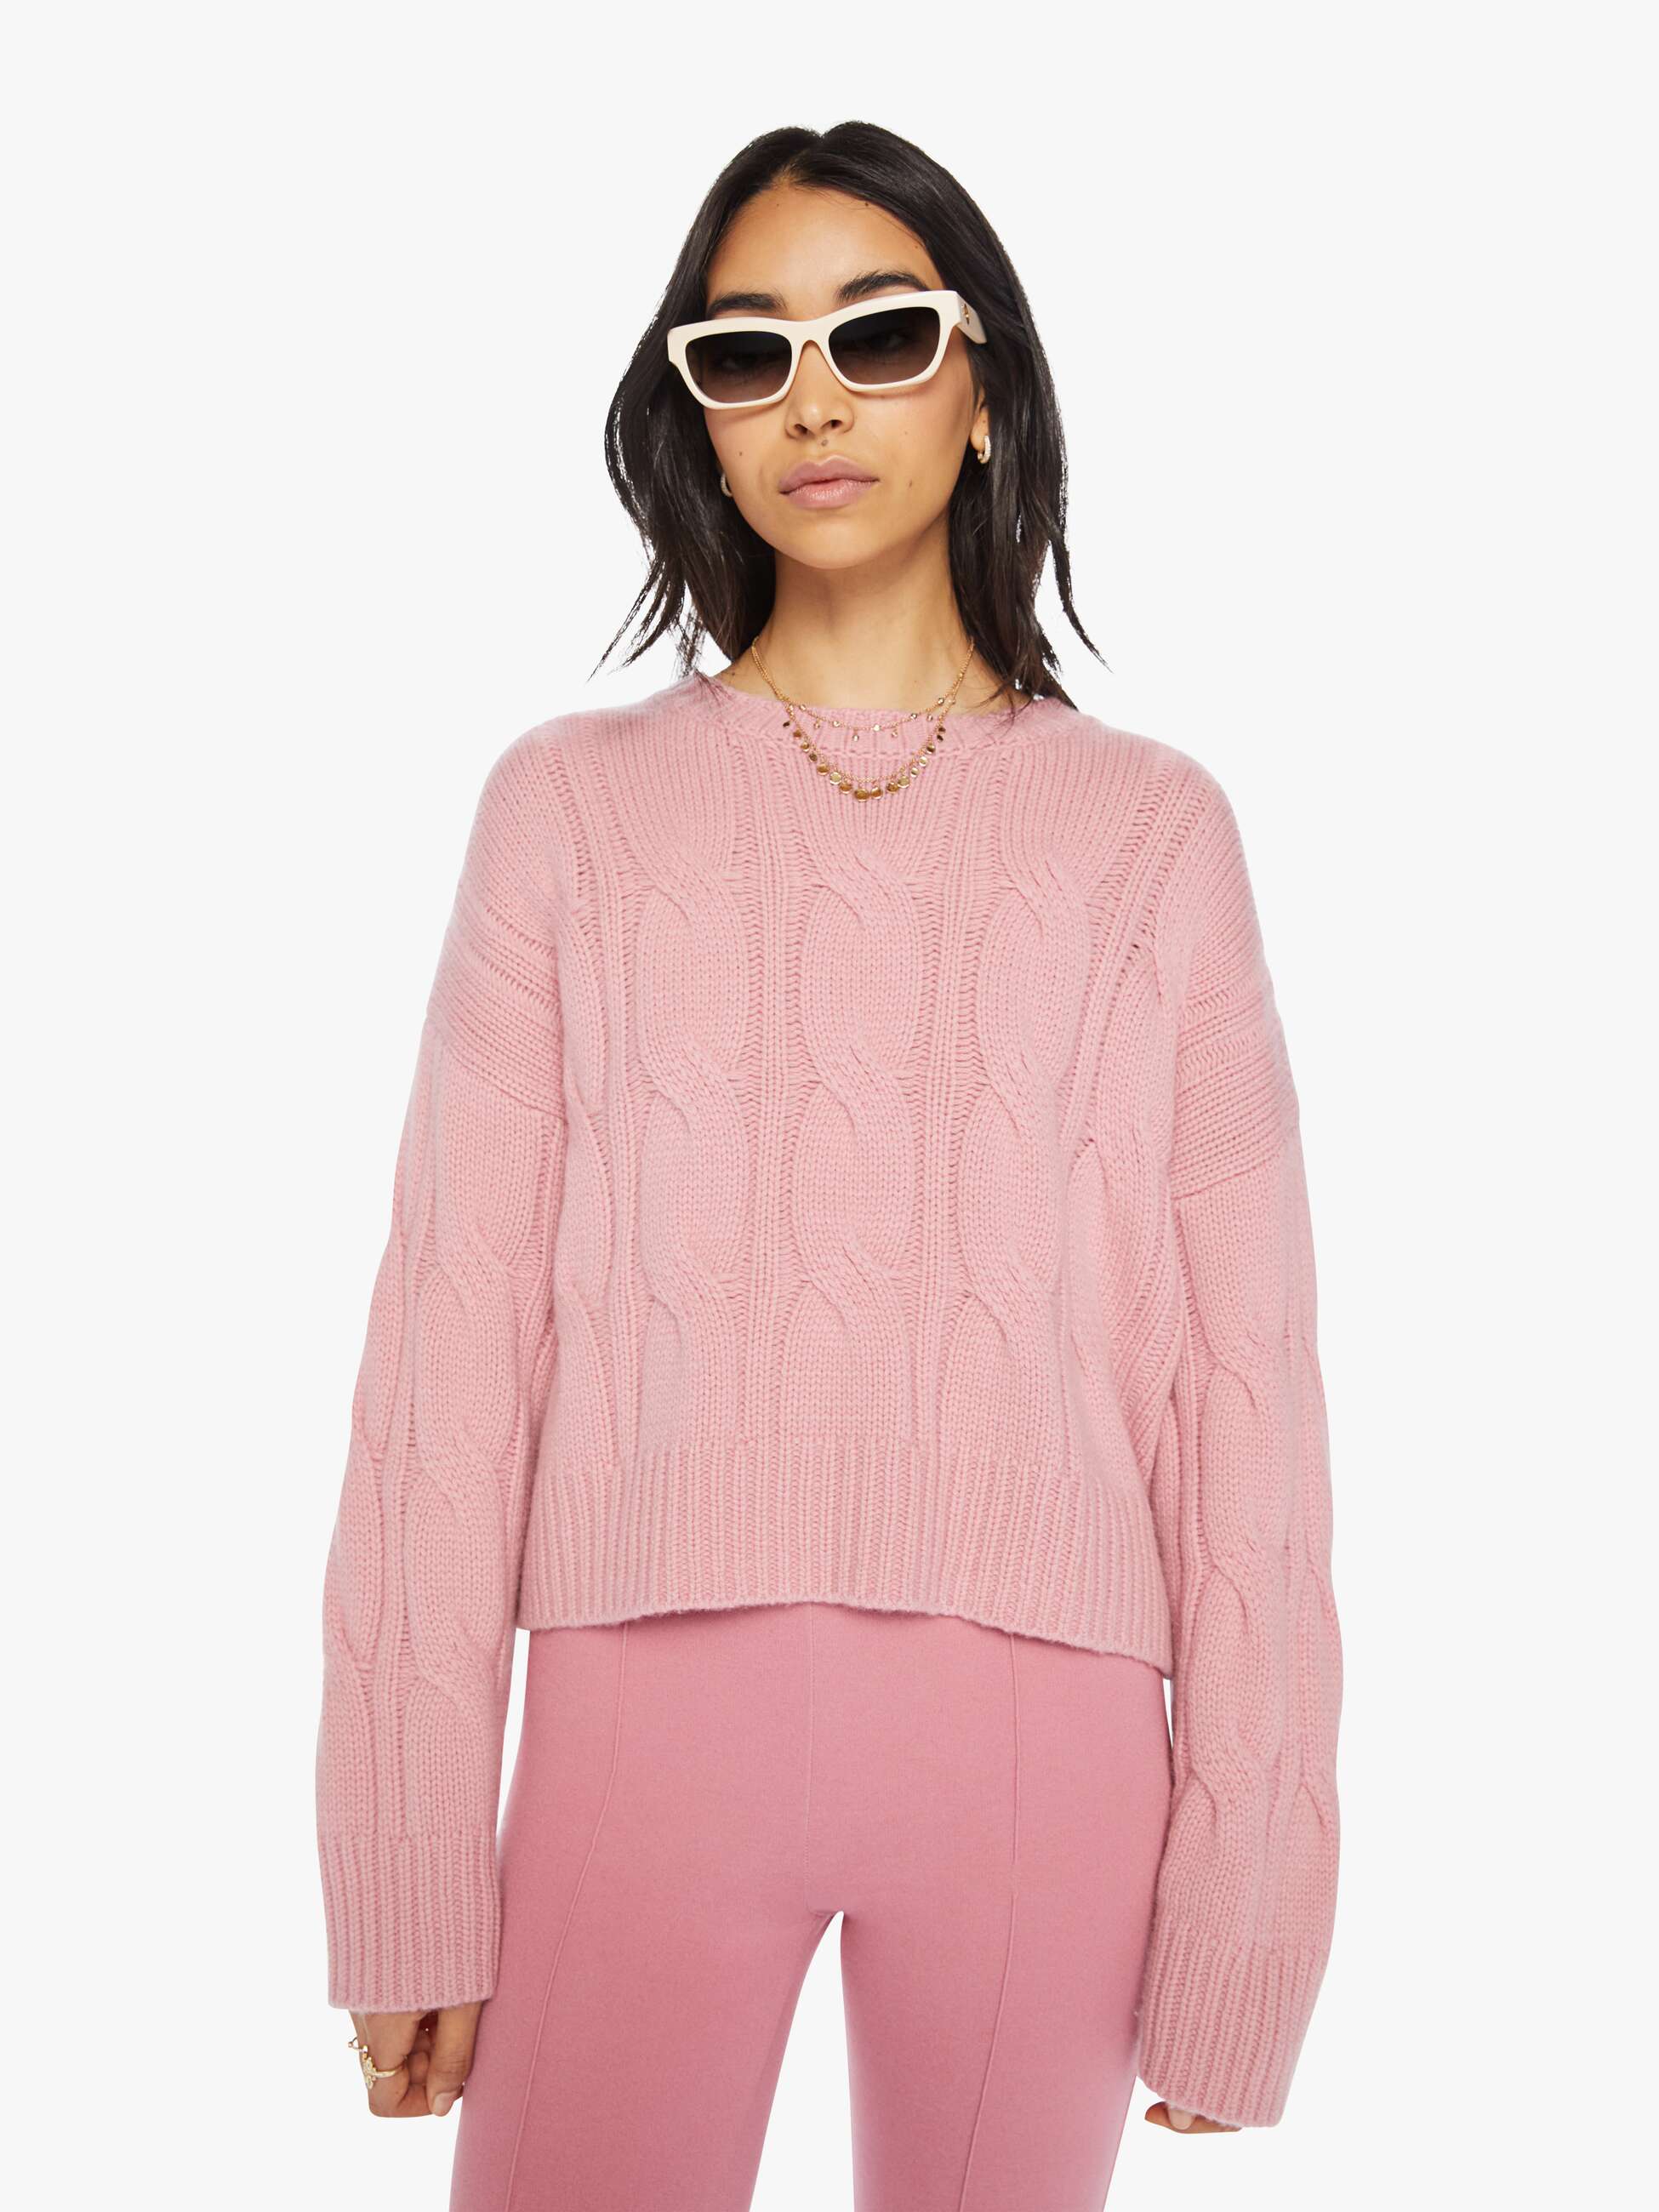 Zara Women's Cable Cashmere Knit Sweater